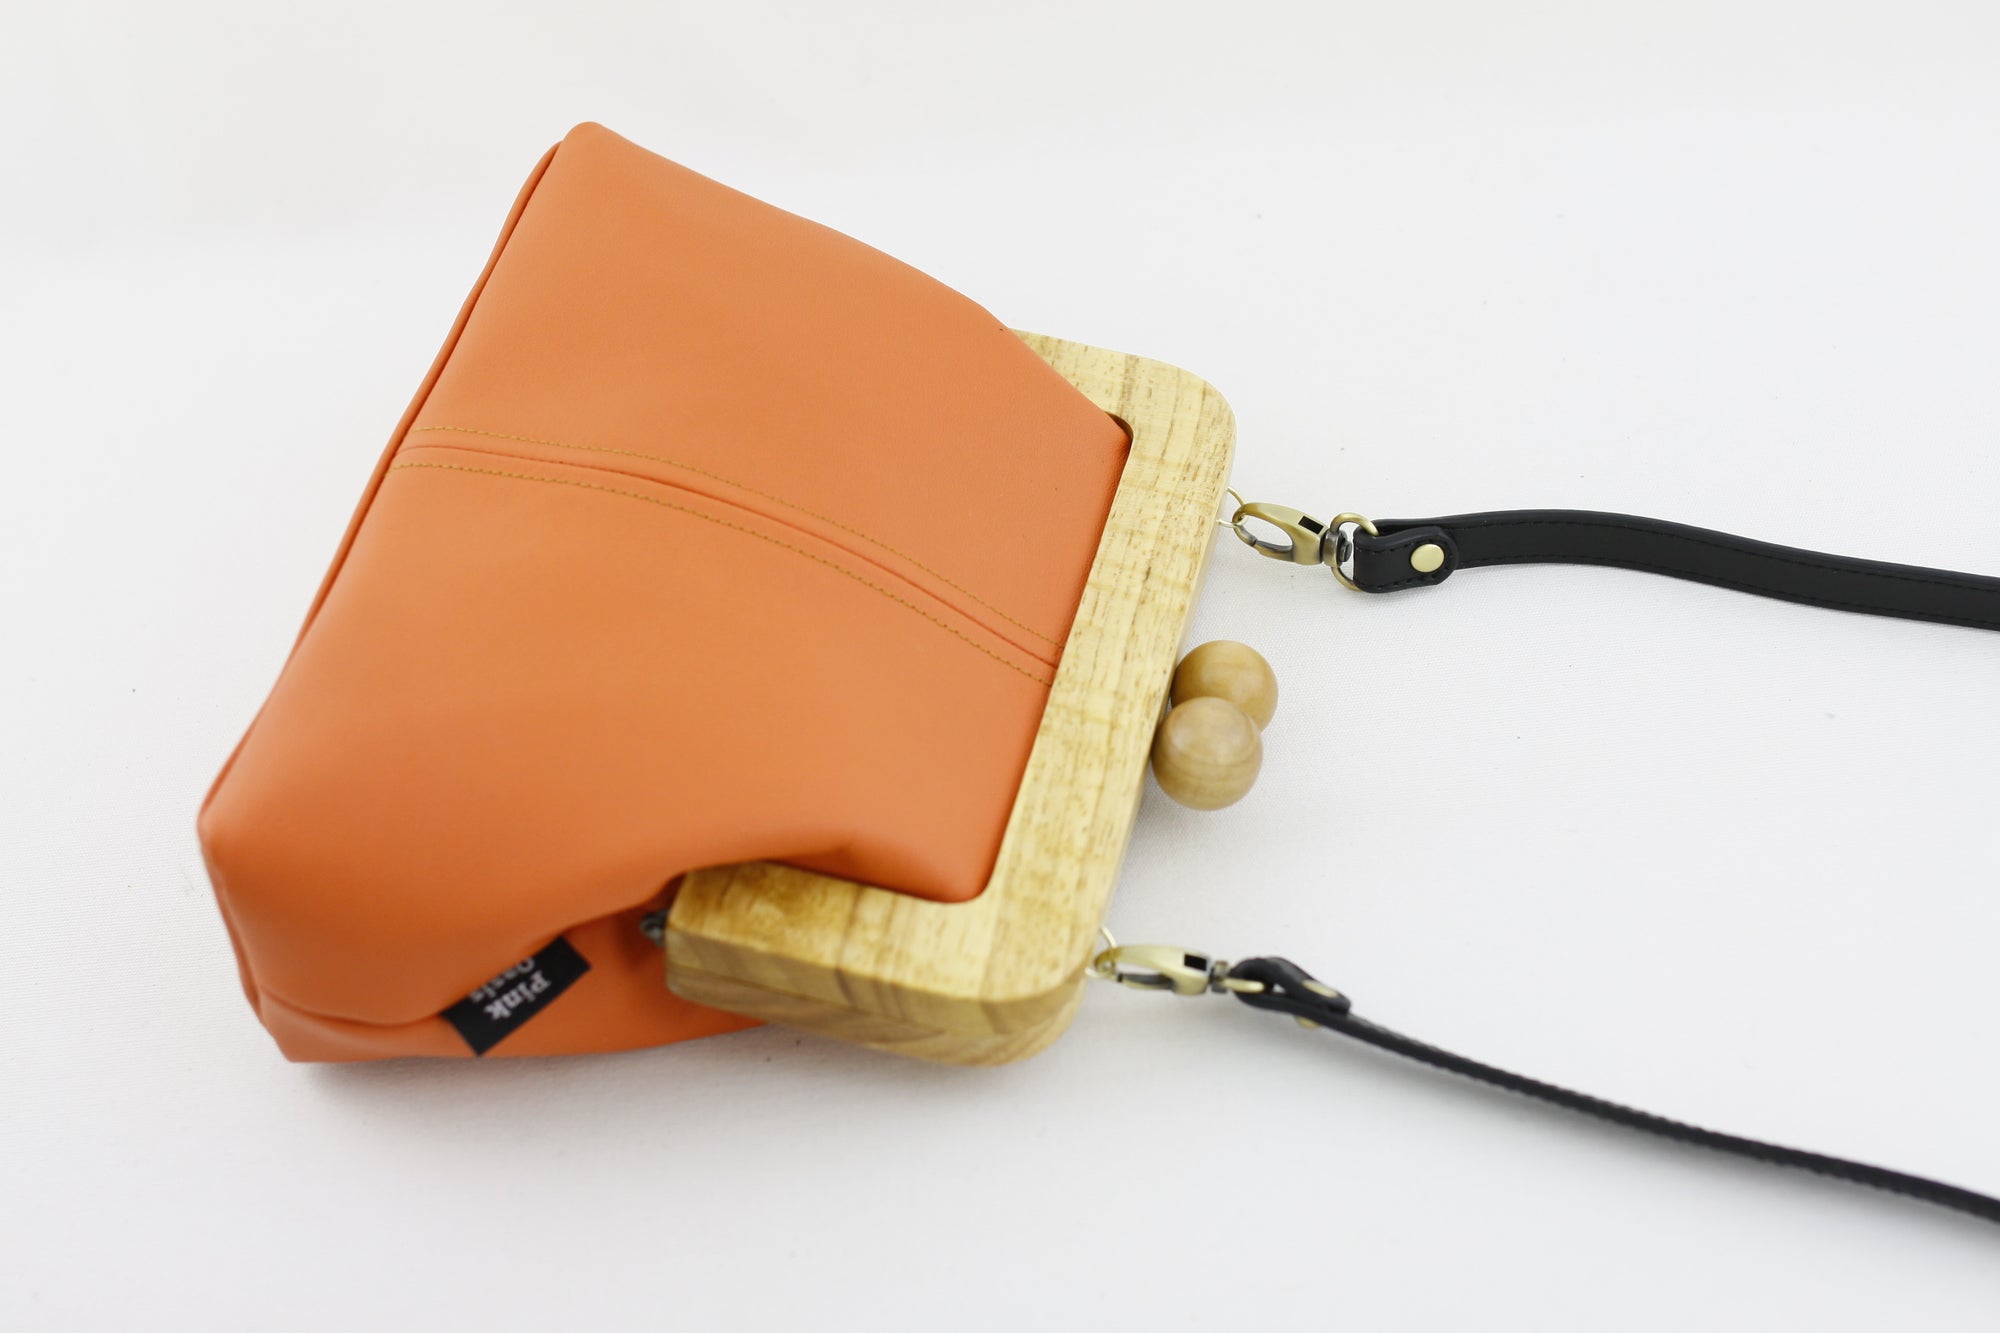 Women's Peach Genuine Leather Clutch Bag with Strap | PINKOASIS